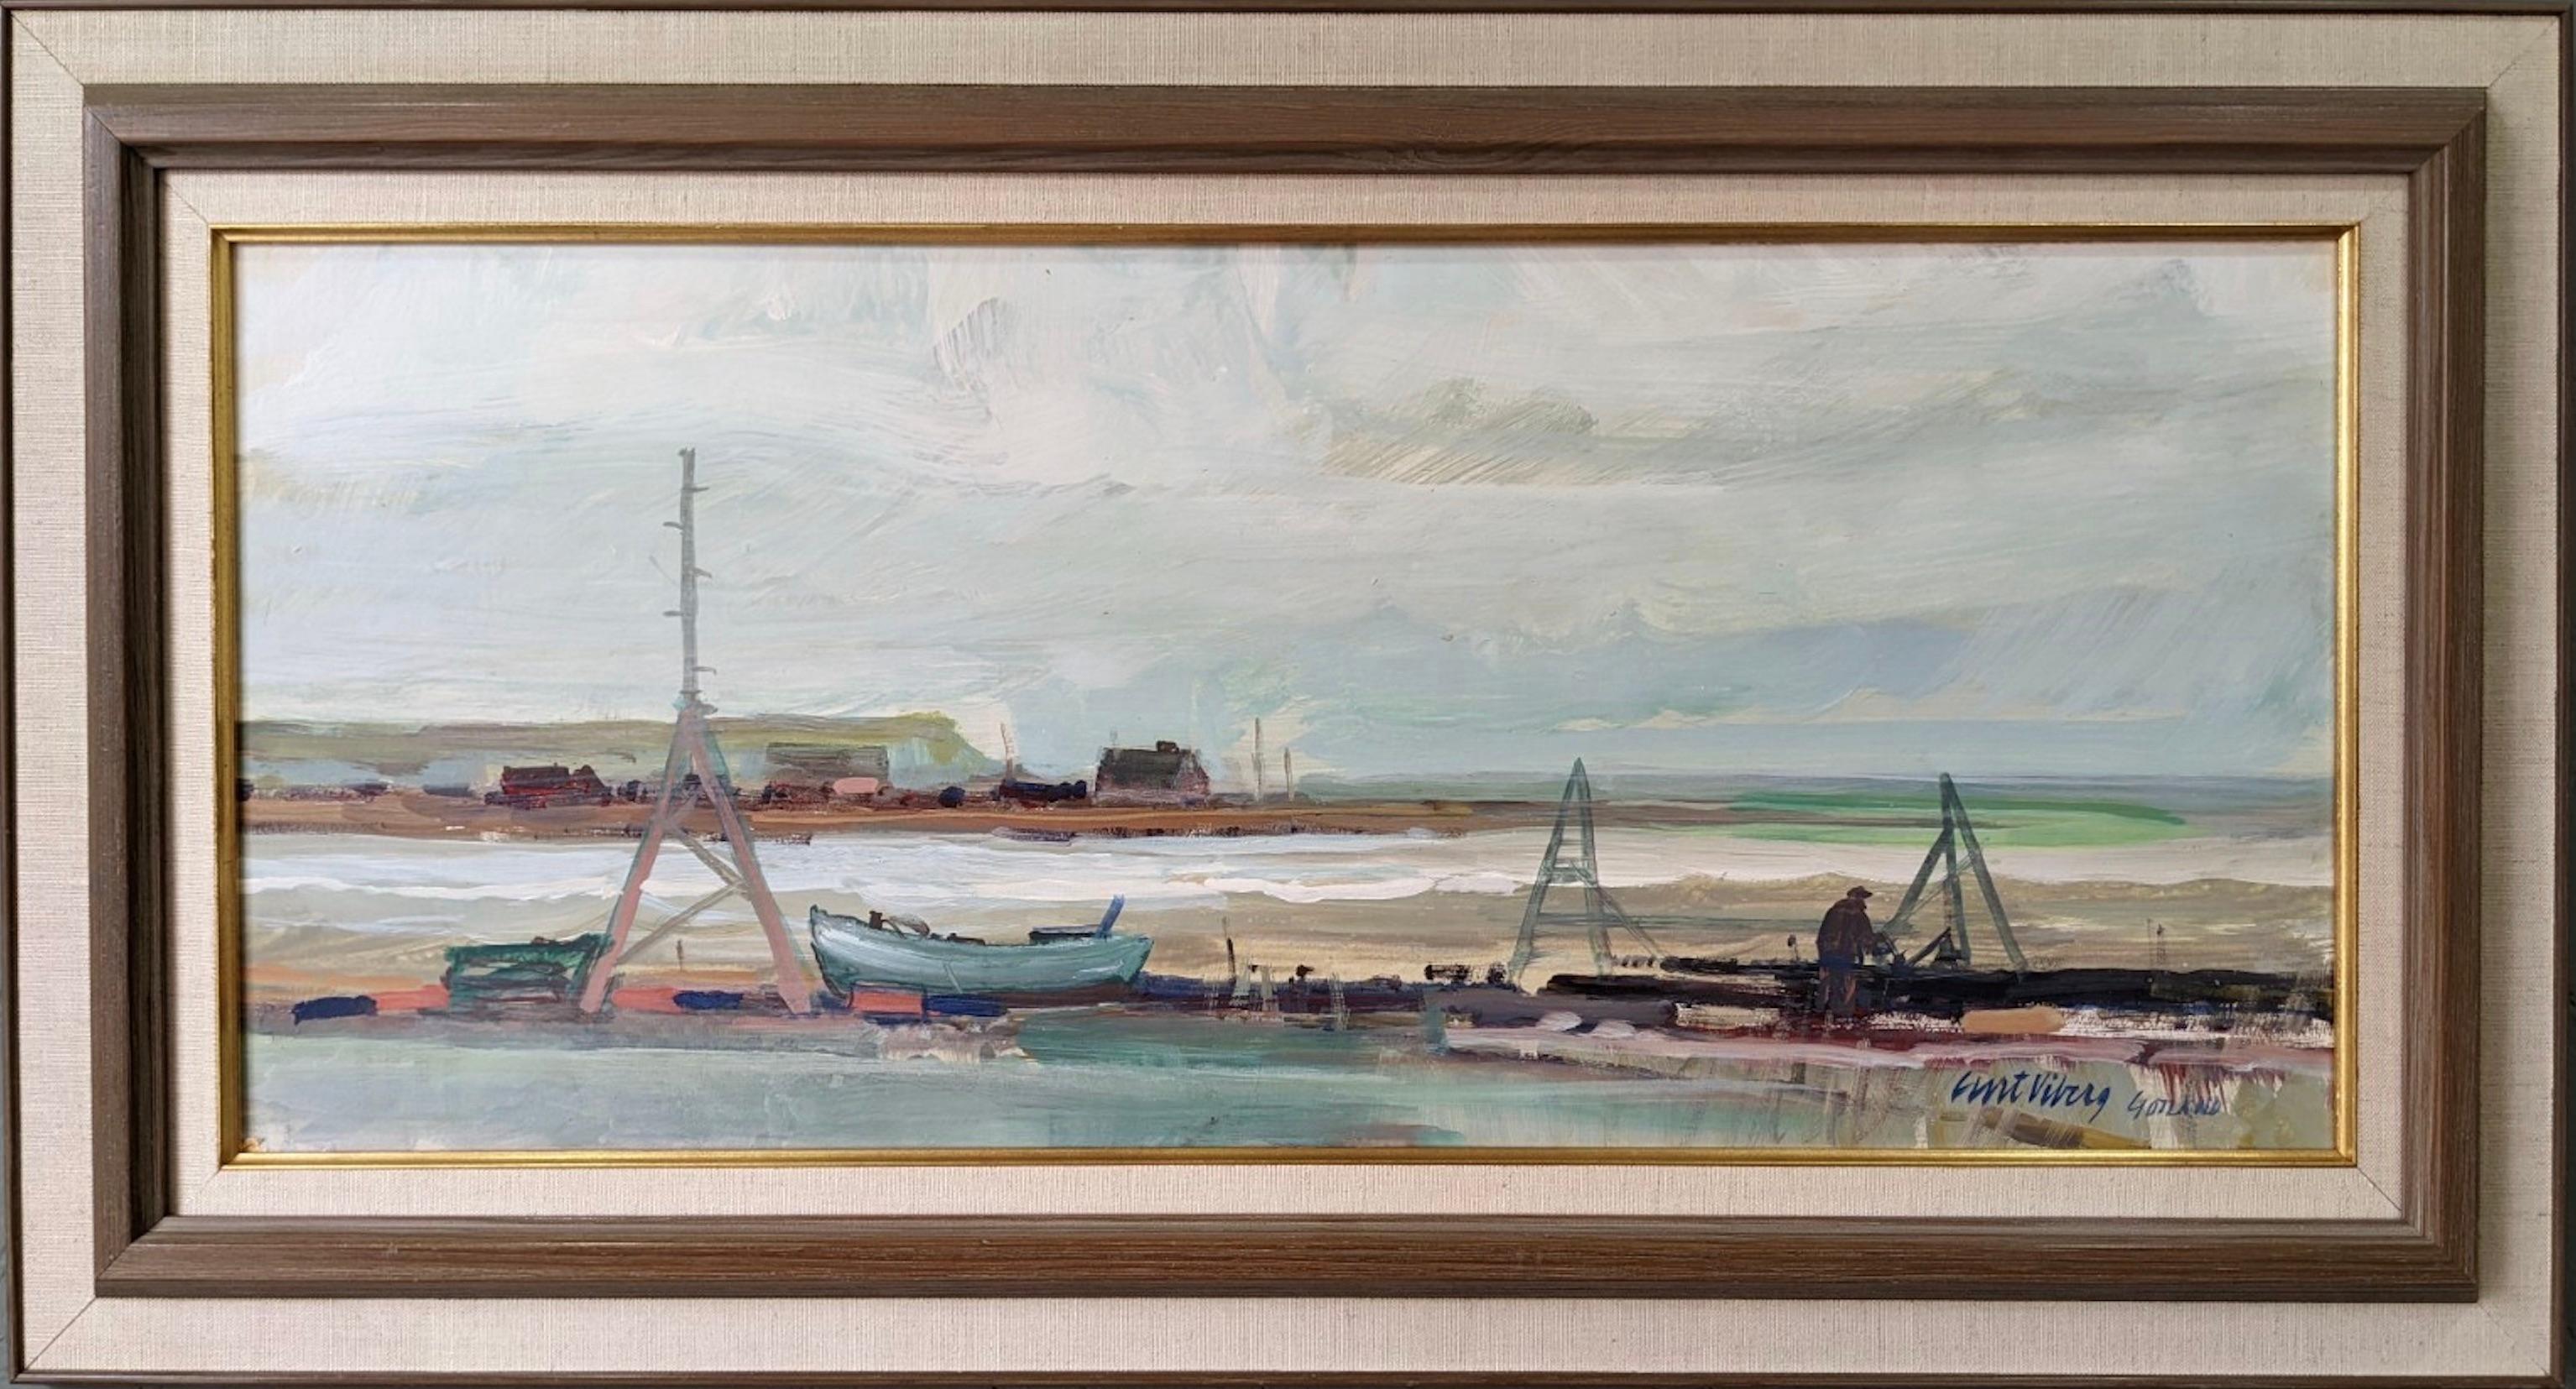 Unknown Landscape Painting - Vintage Mid-Century Modern Swedish Coastal Town Framed Oil Painting - Gotland